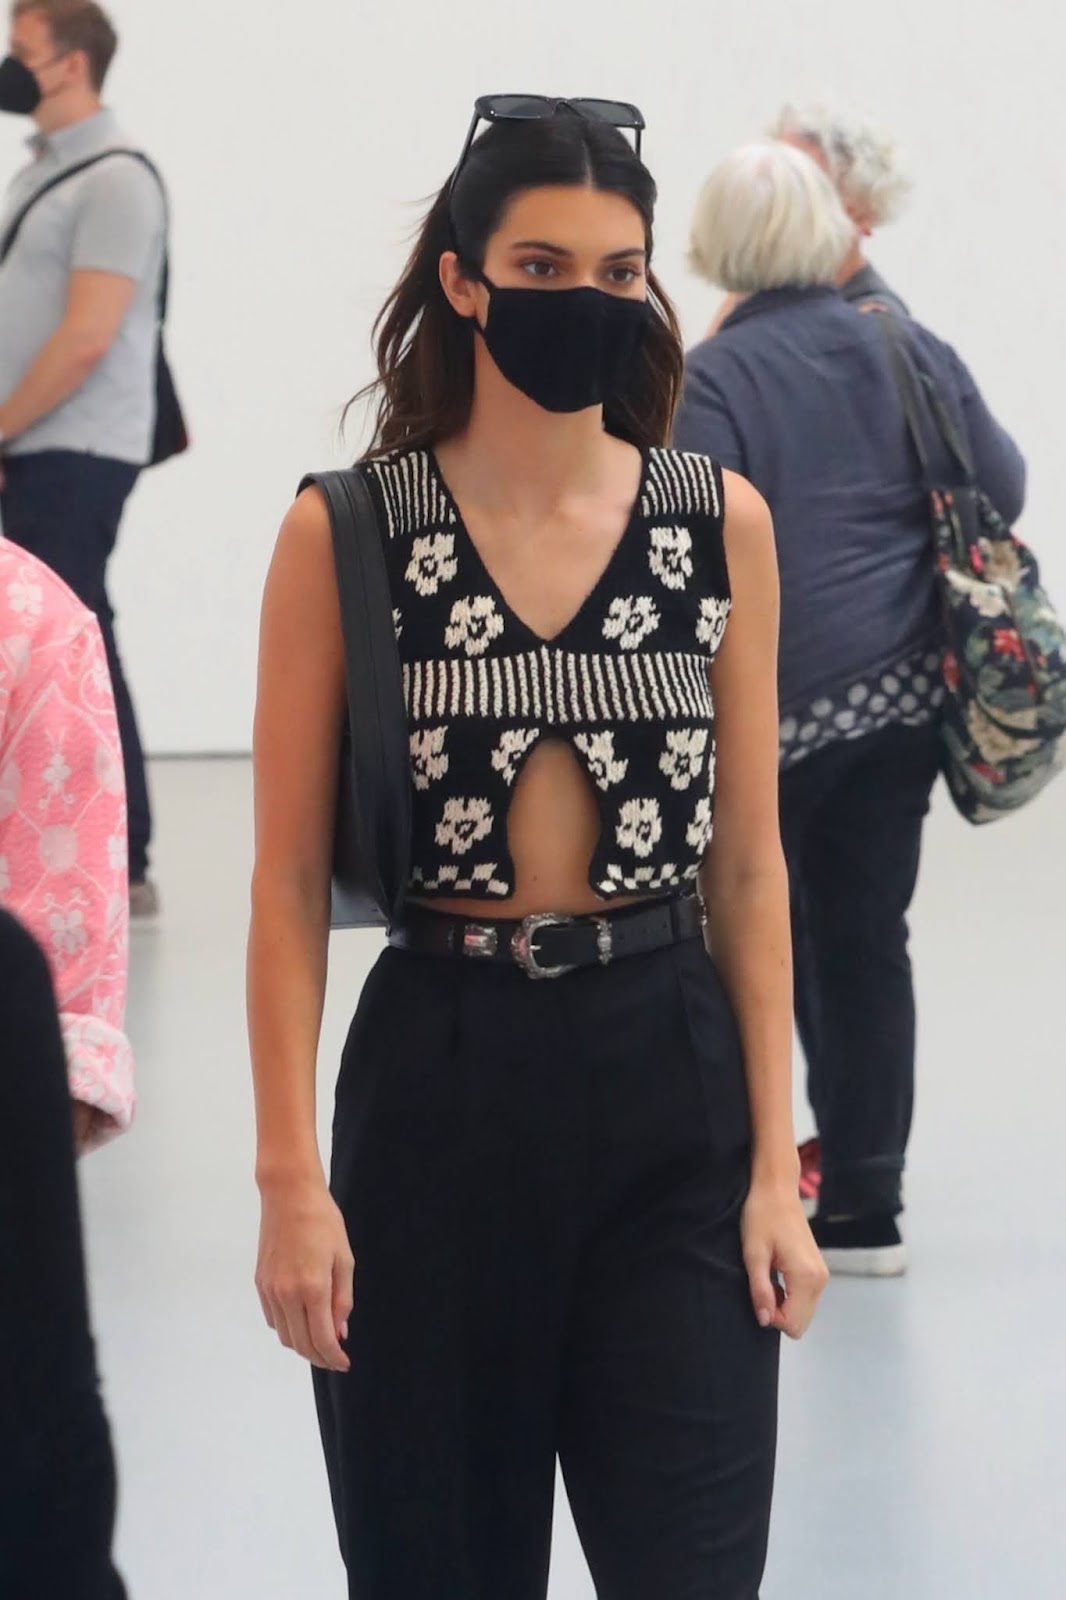 Kendall Jenner in a cropped top and pleated black trousers while visiting art galleries in New York City